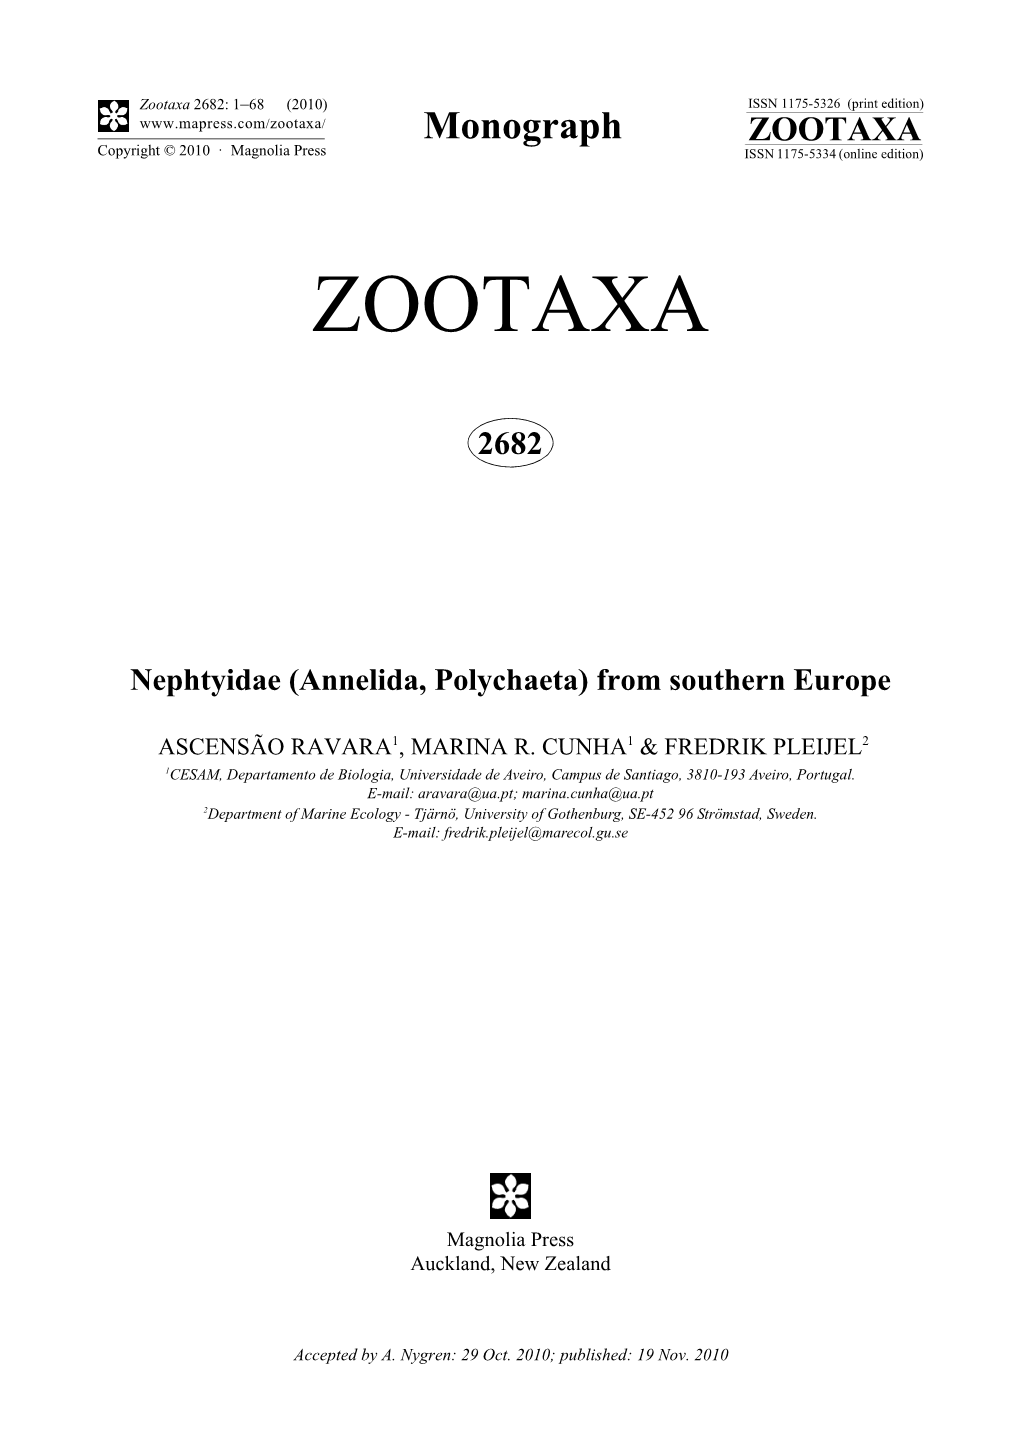 Nephtyidae (Annelida, Polychaeta) from Southern Europe